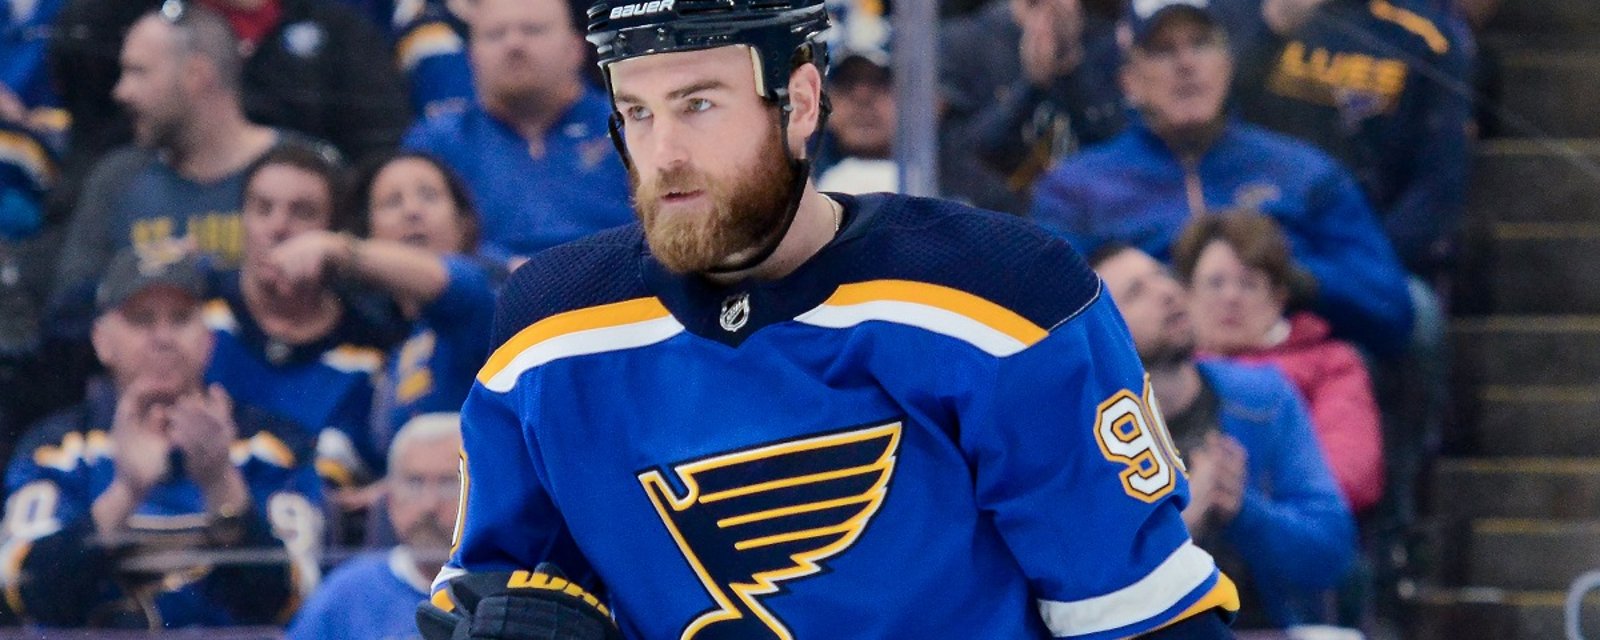 Ryan O'Reilly blames one player for the loss in Game 6.